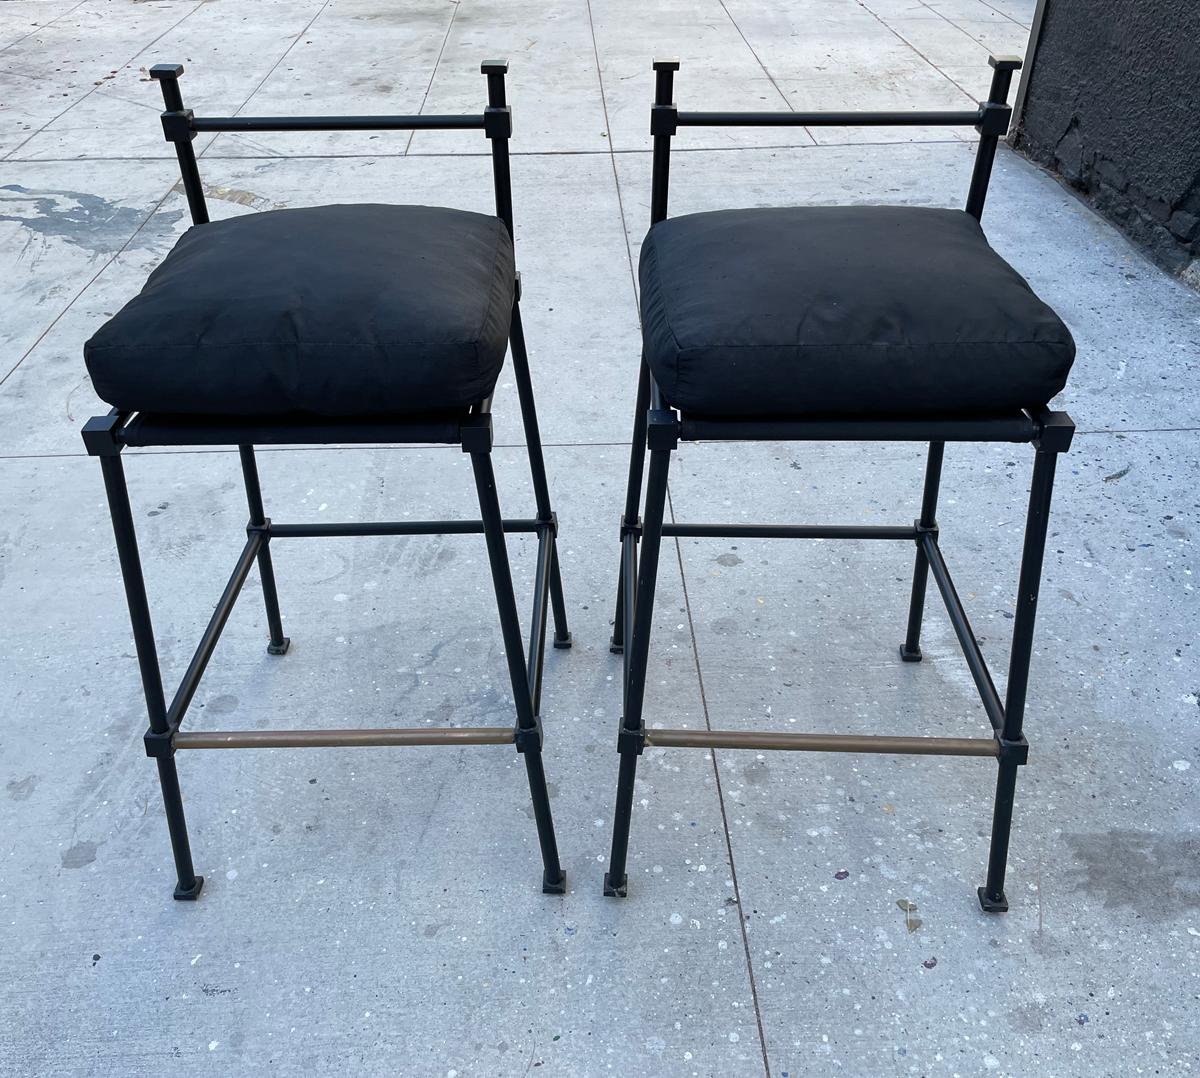 Pair of Barstools in Solid Steel in Powder Black Finish For Sale 8